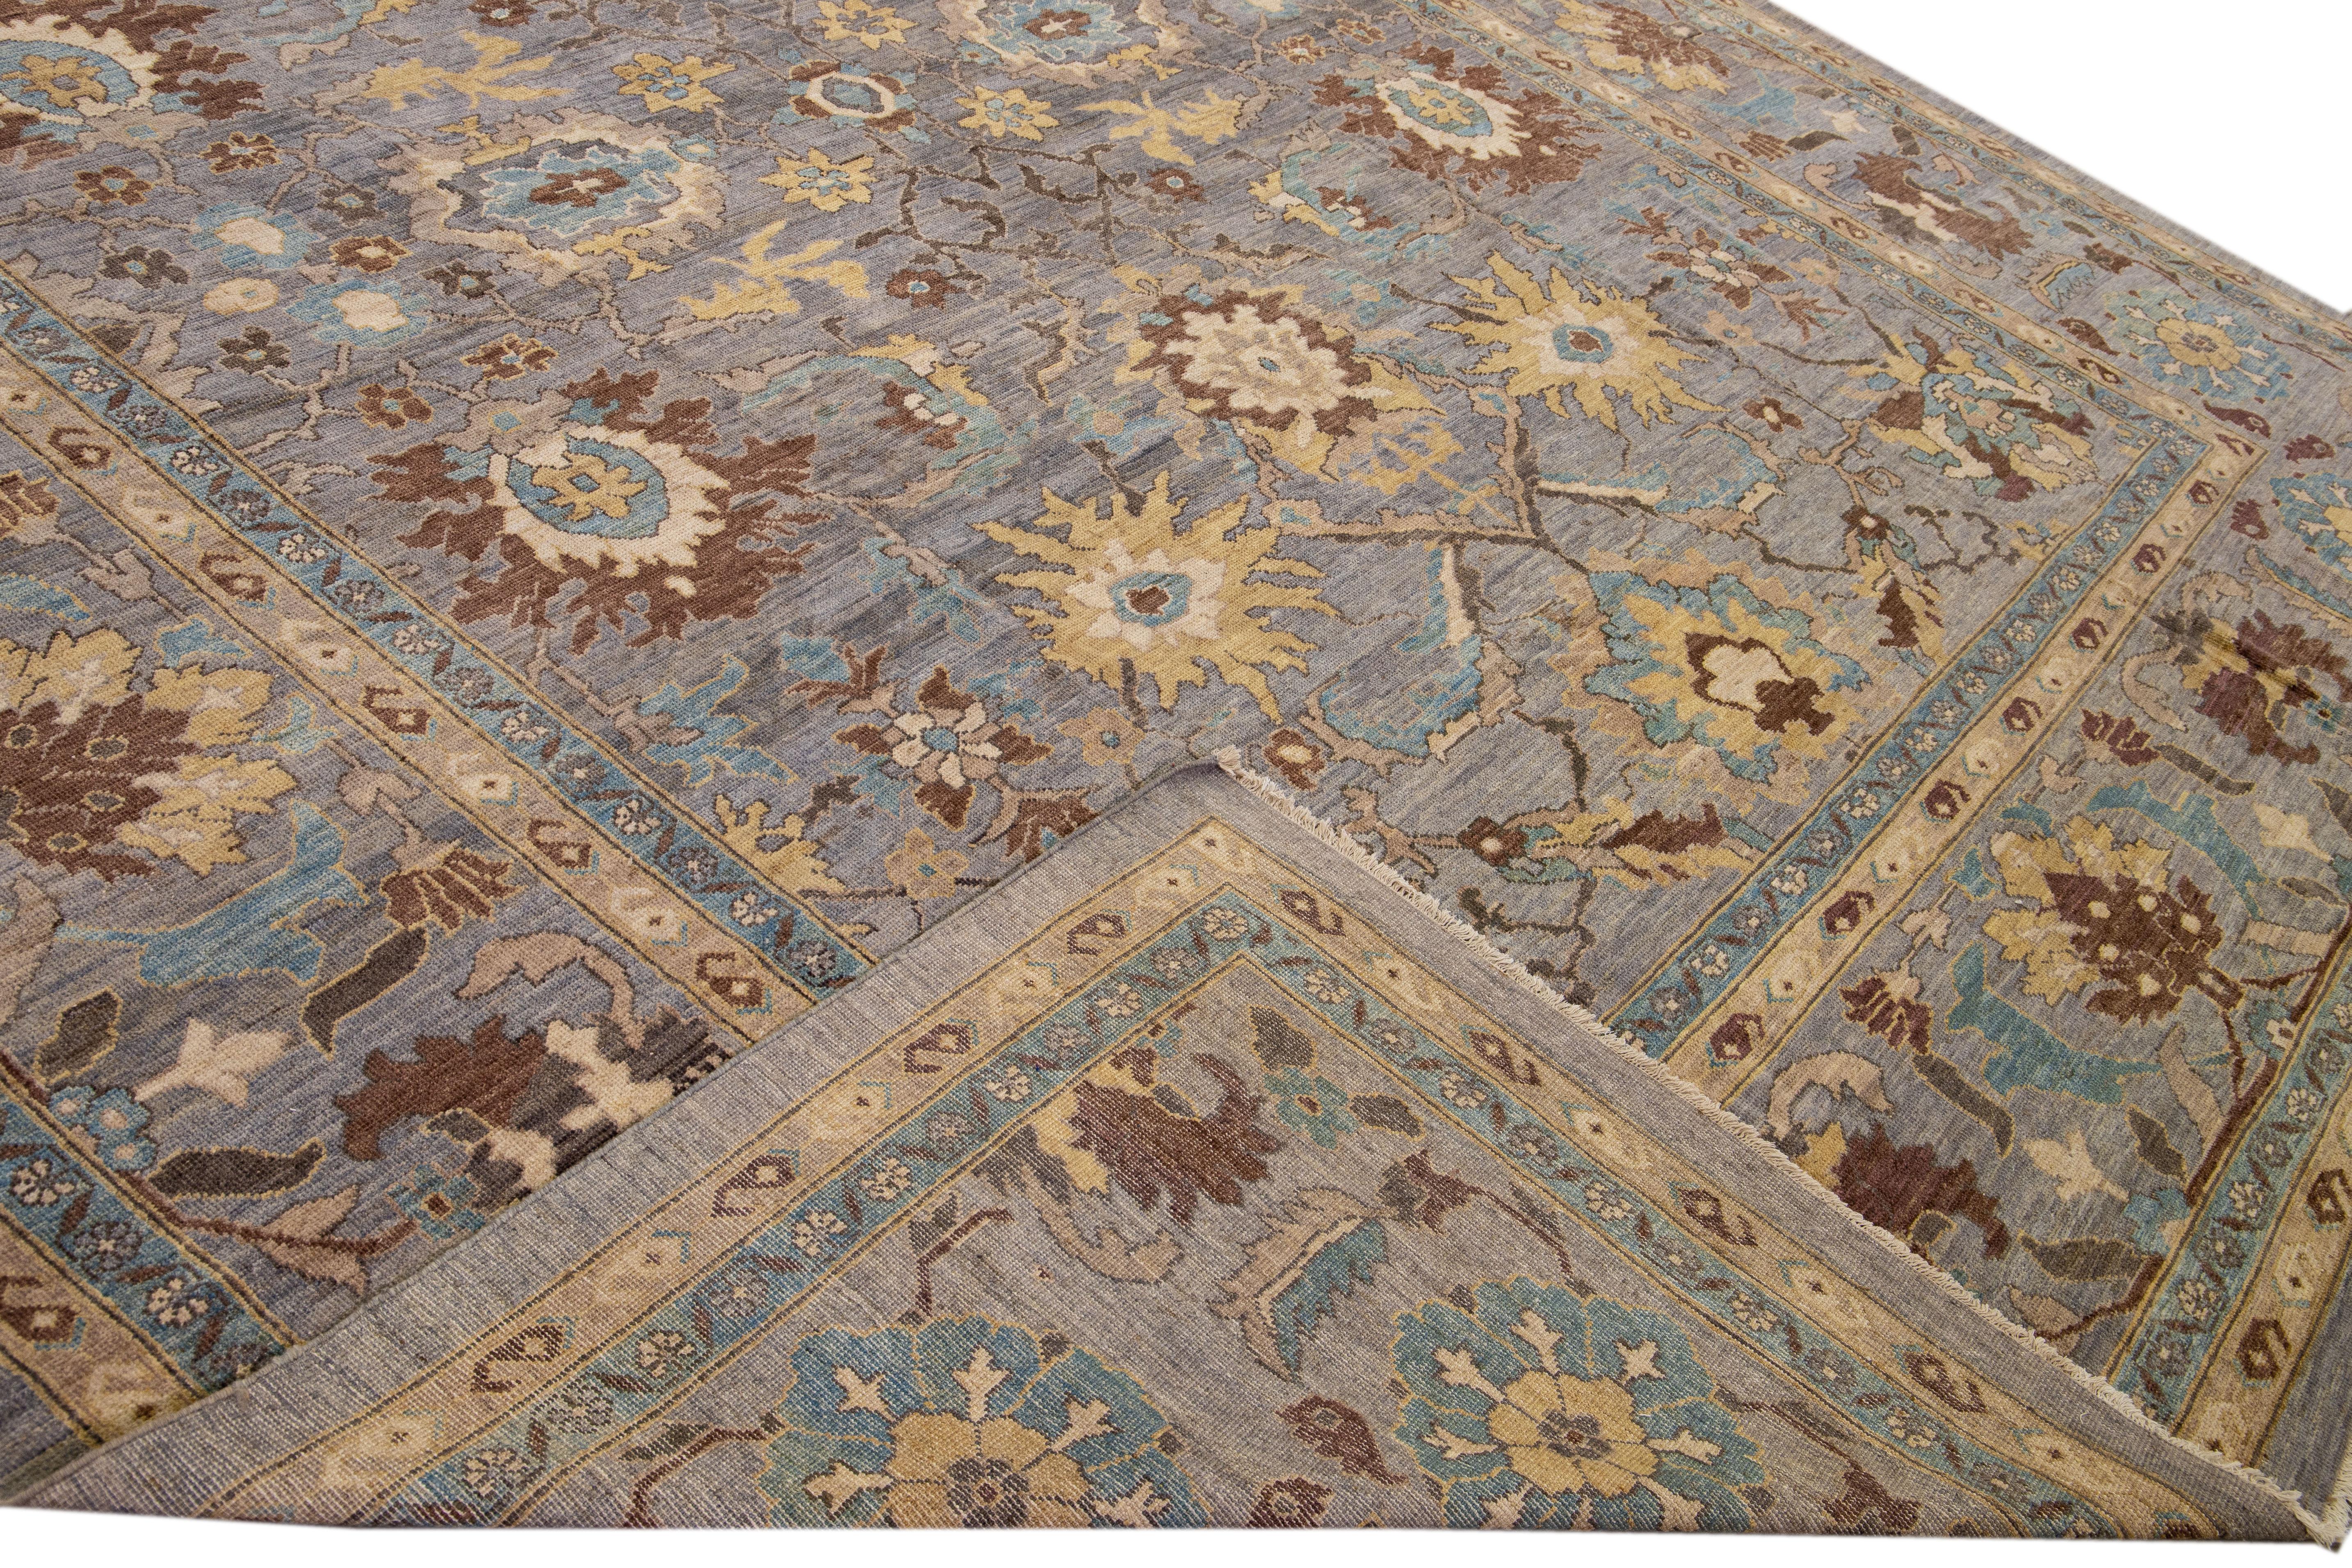 Beautiful modern Sultanabad hand-knotted wool rug with a gray field. This Sultanabad rug has a beige, blue, brown, and goldenrod accent in a gorgeous all-over classic floral pattern design.

This rug measures: 13' x 22'6